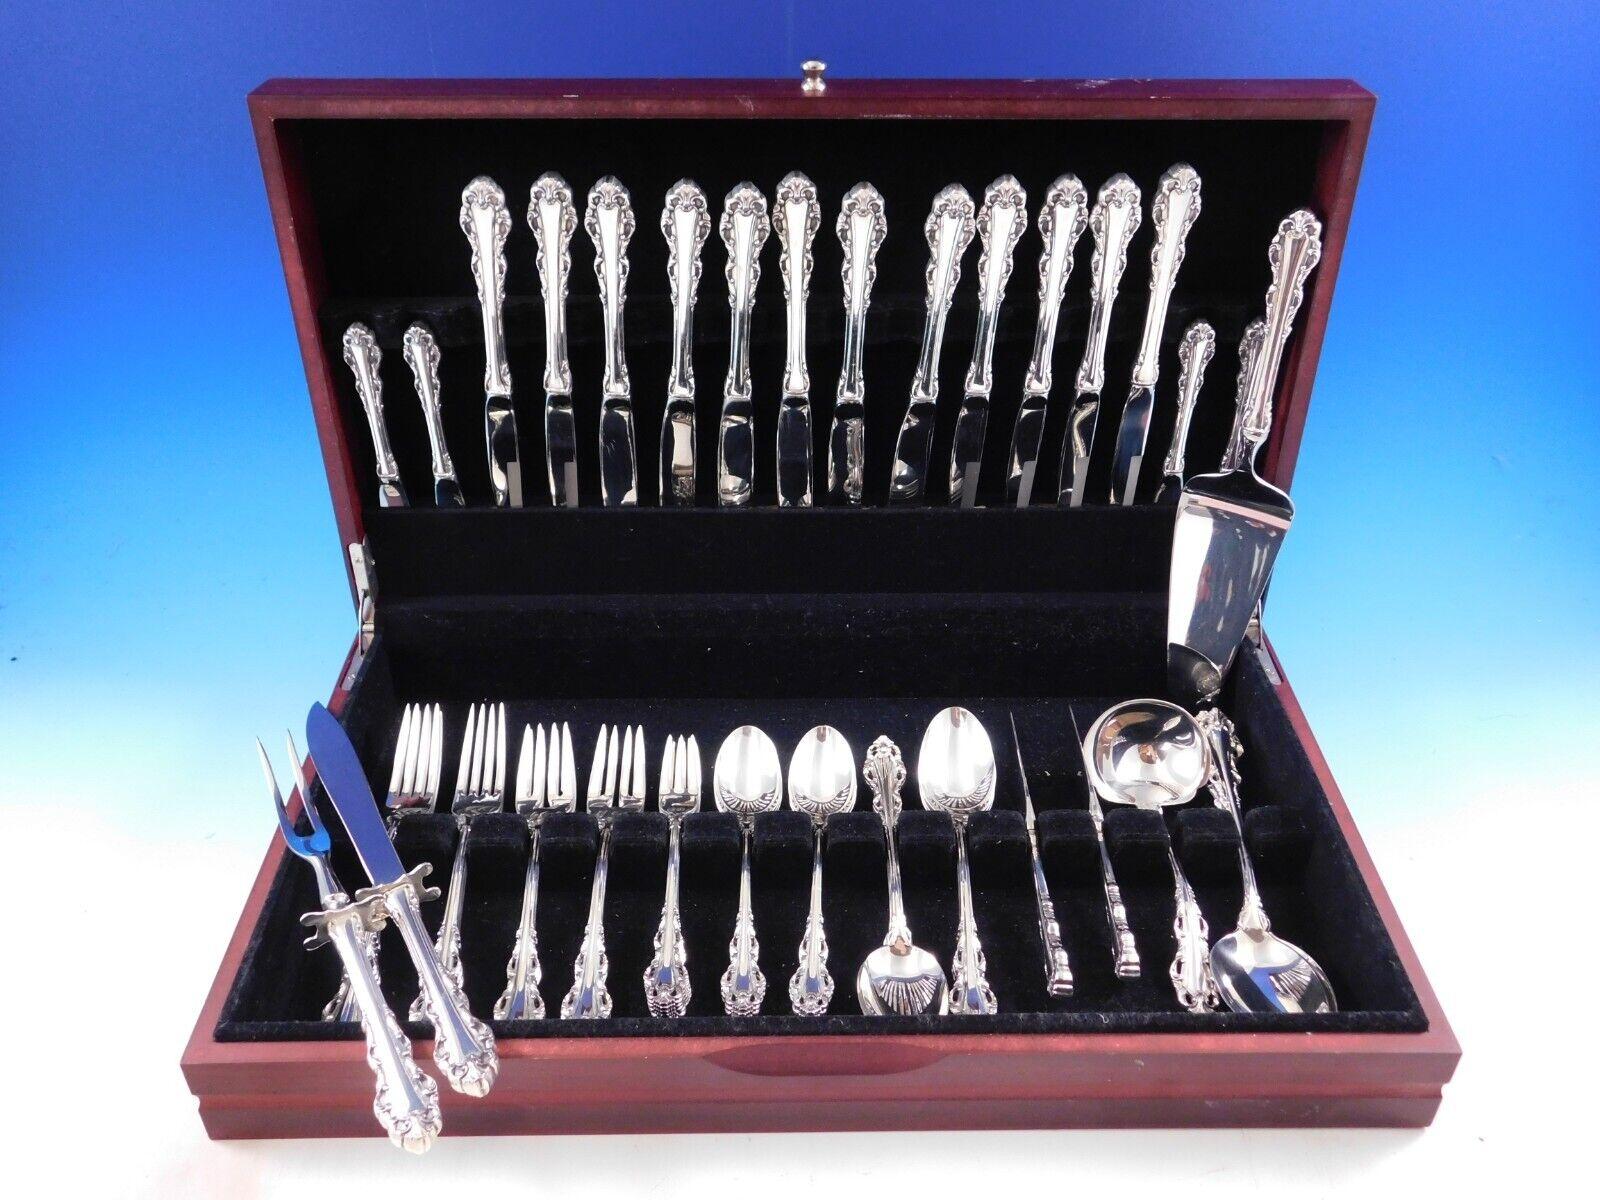 Dresden Scroll by Lunt sterling silver Flatware set, 54 pieces. This set includes:

6 Knives, 9